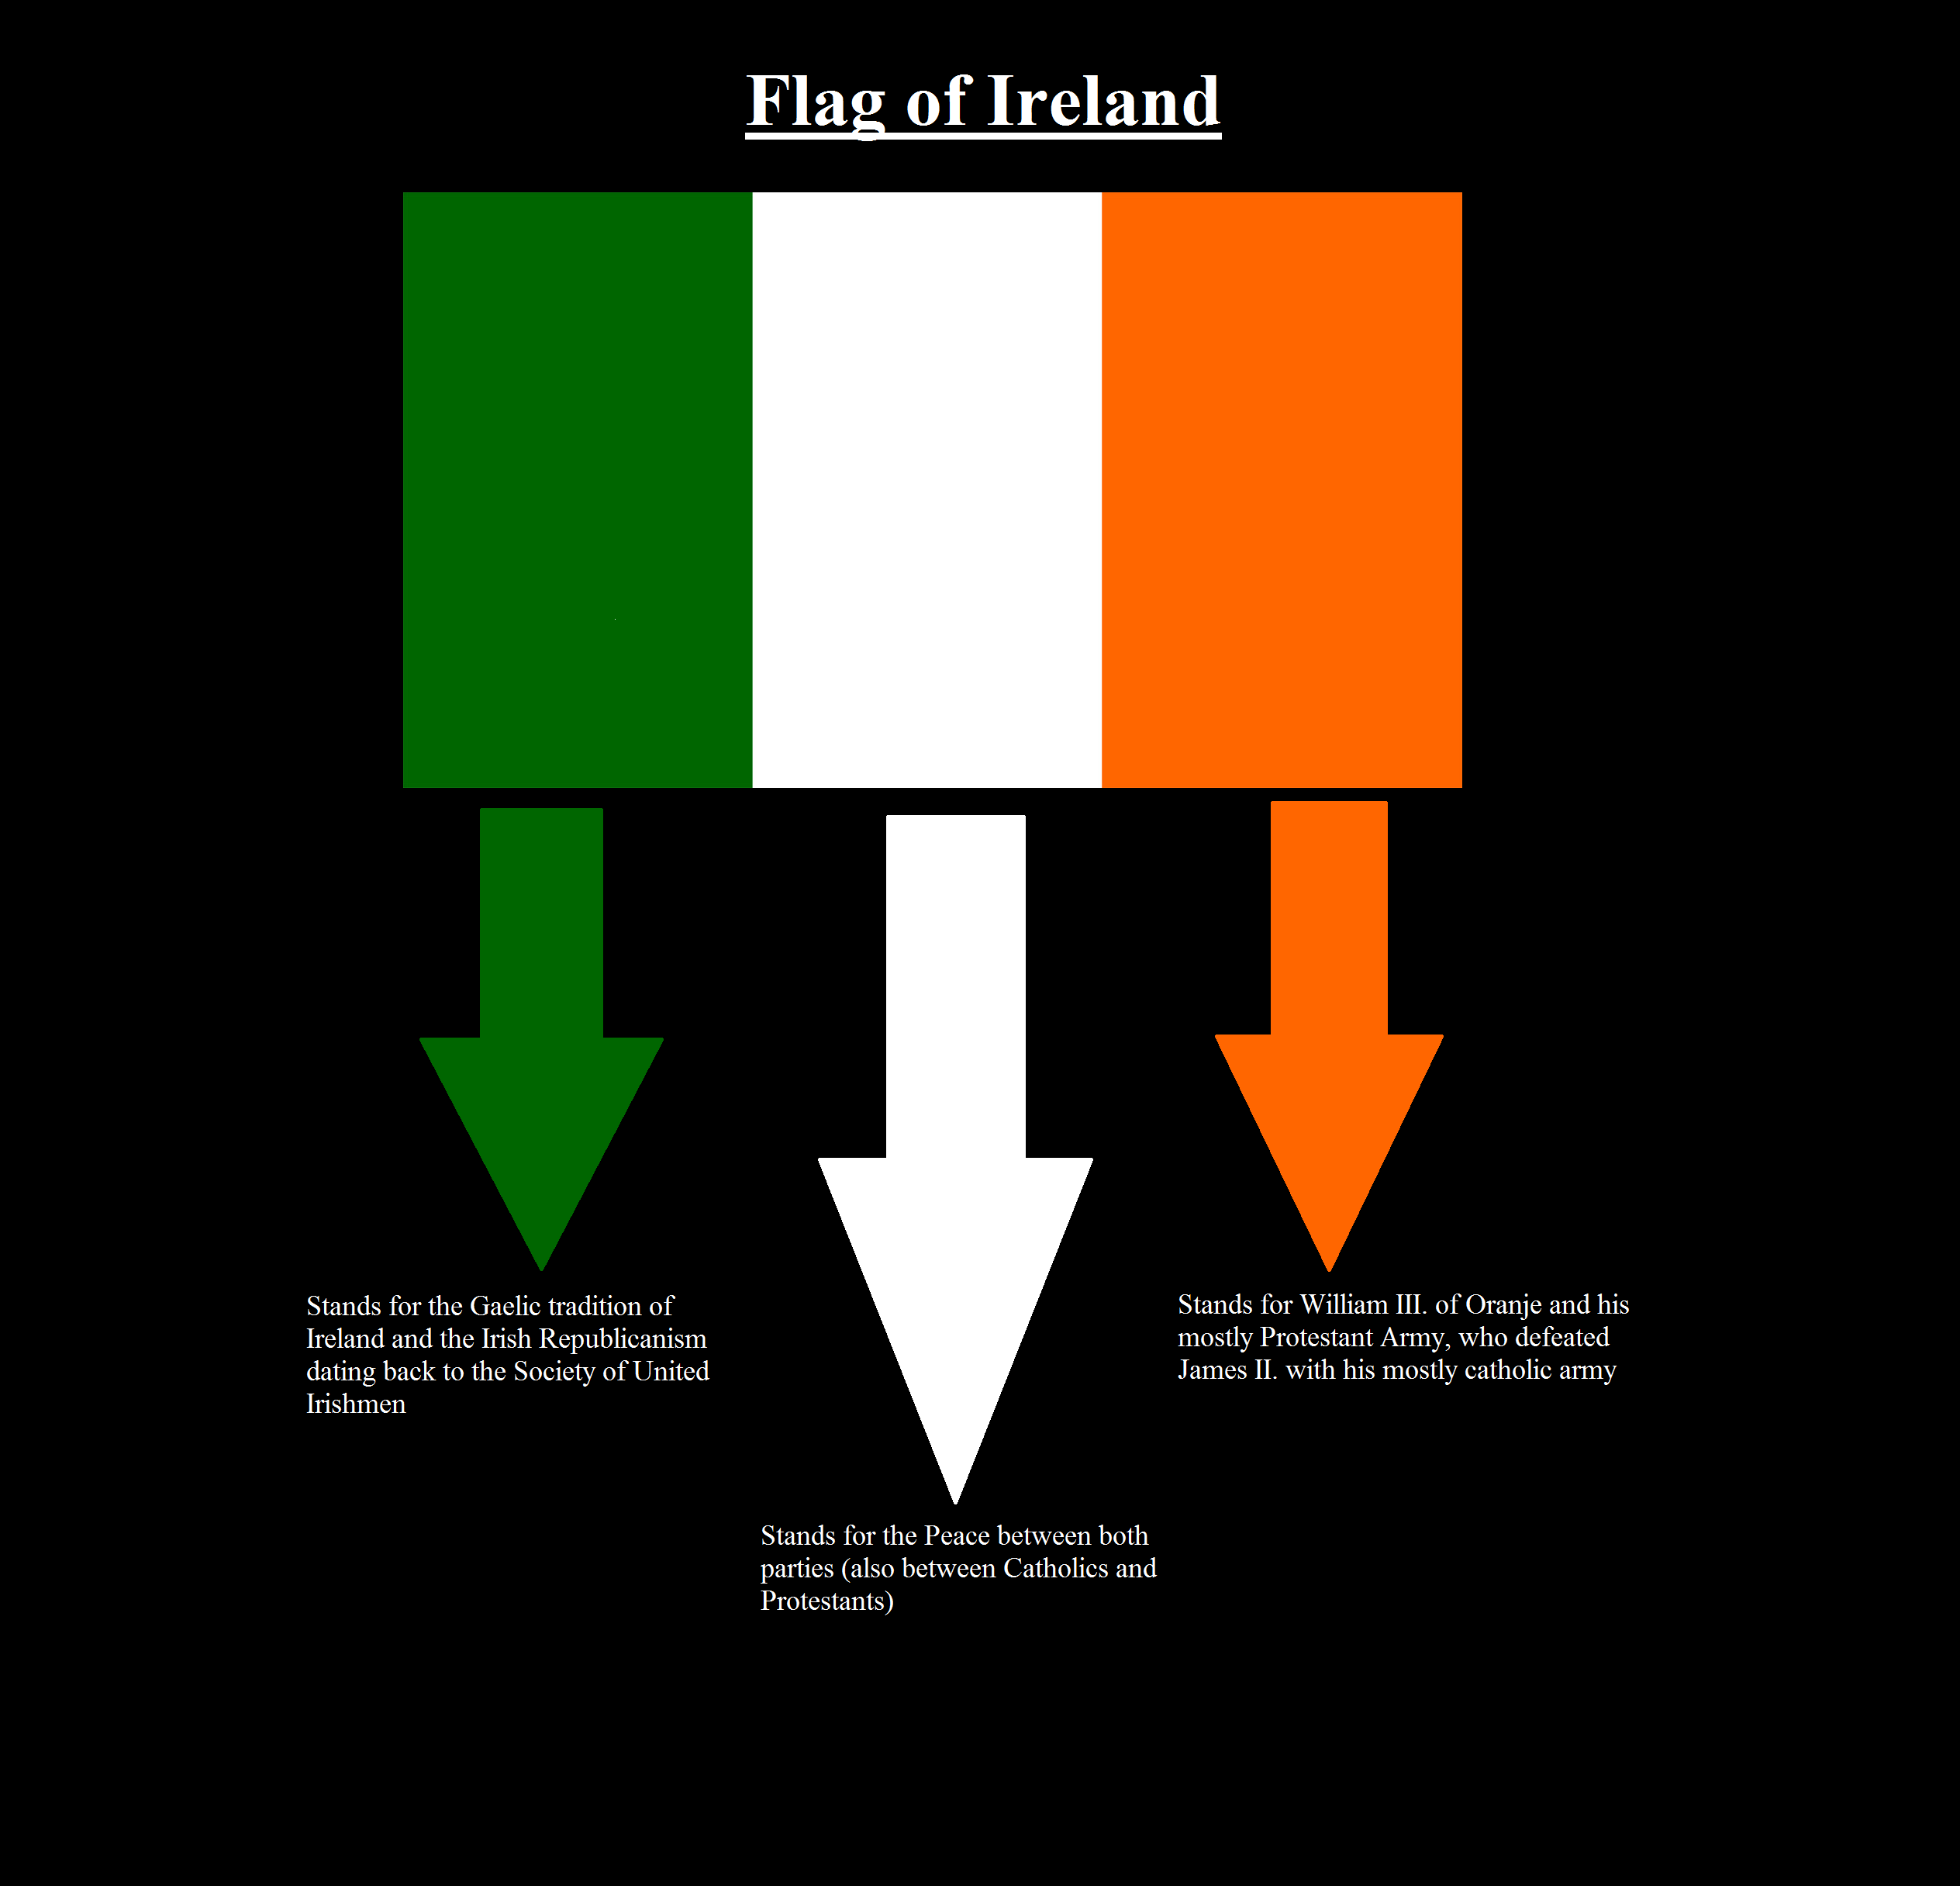 Since it's St. Paddy's day this is the meaning of the Irish flag